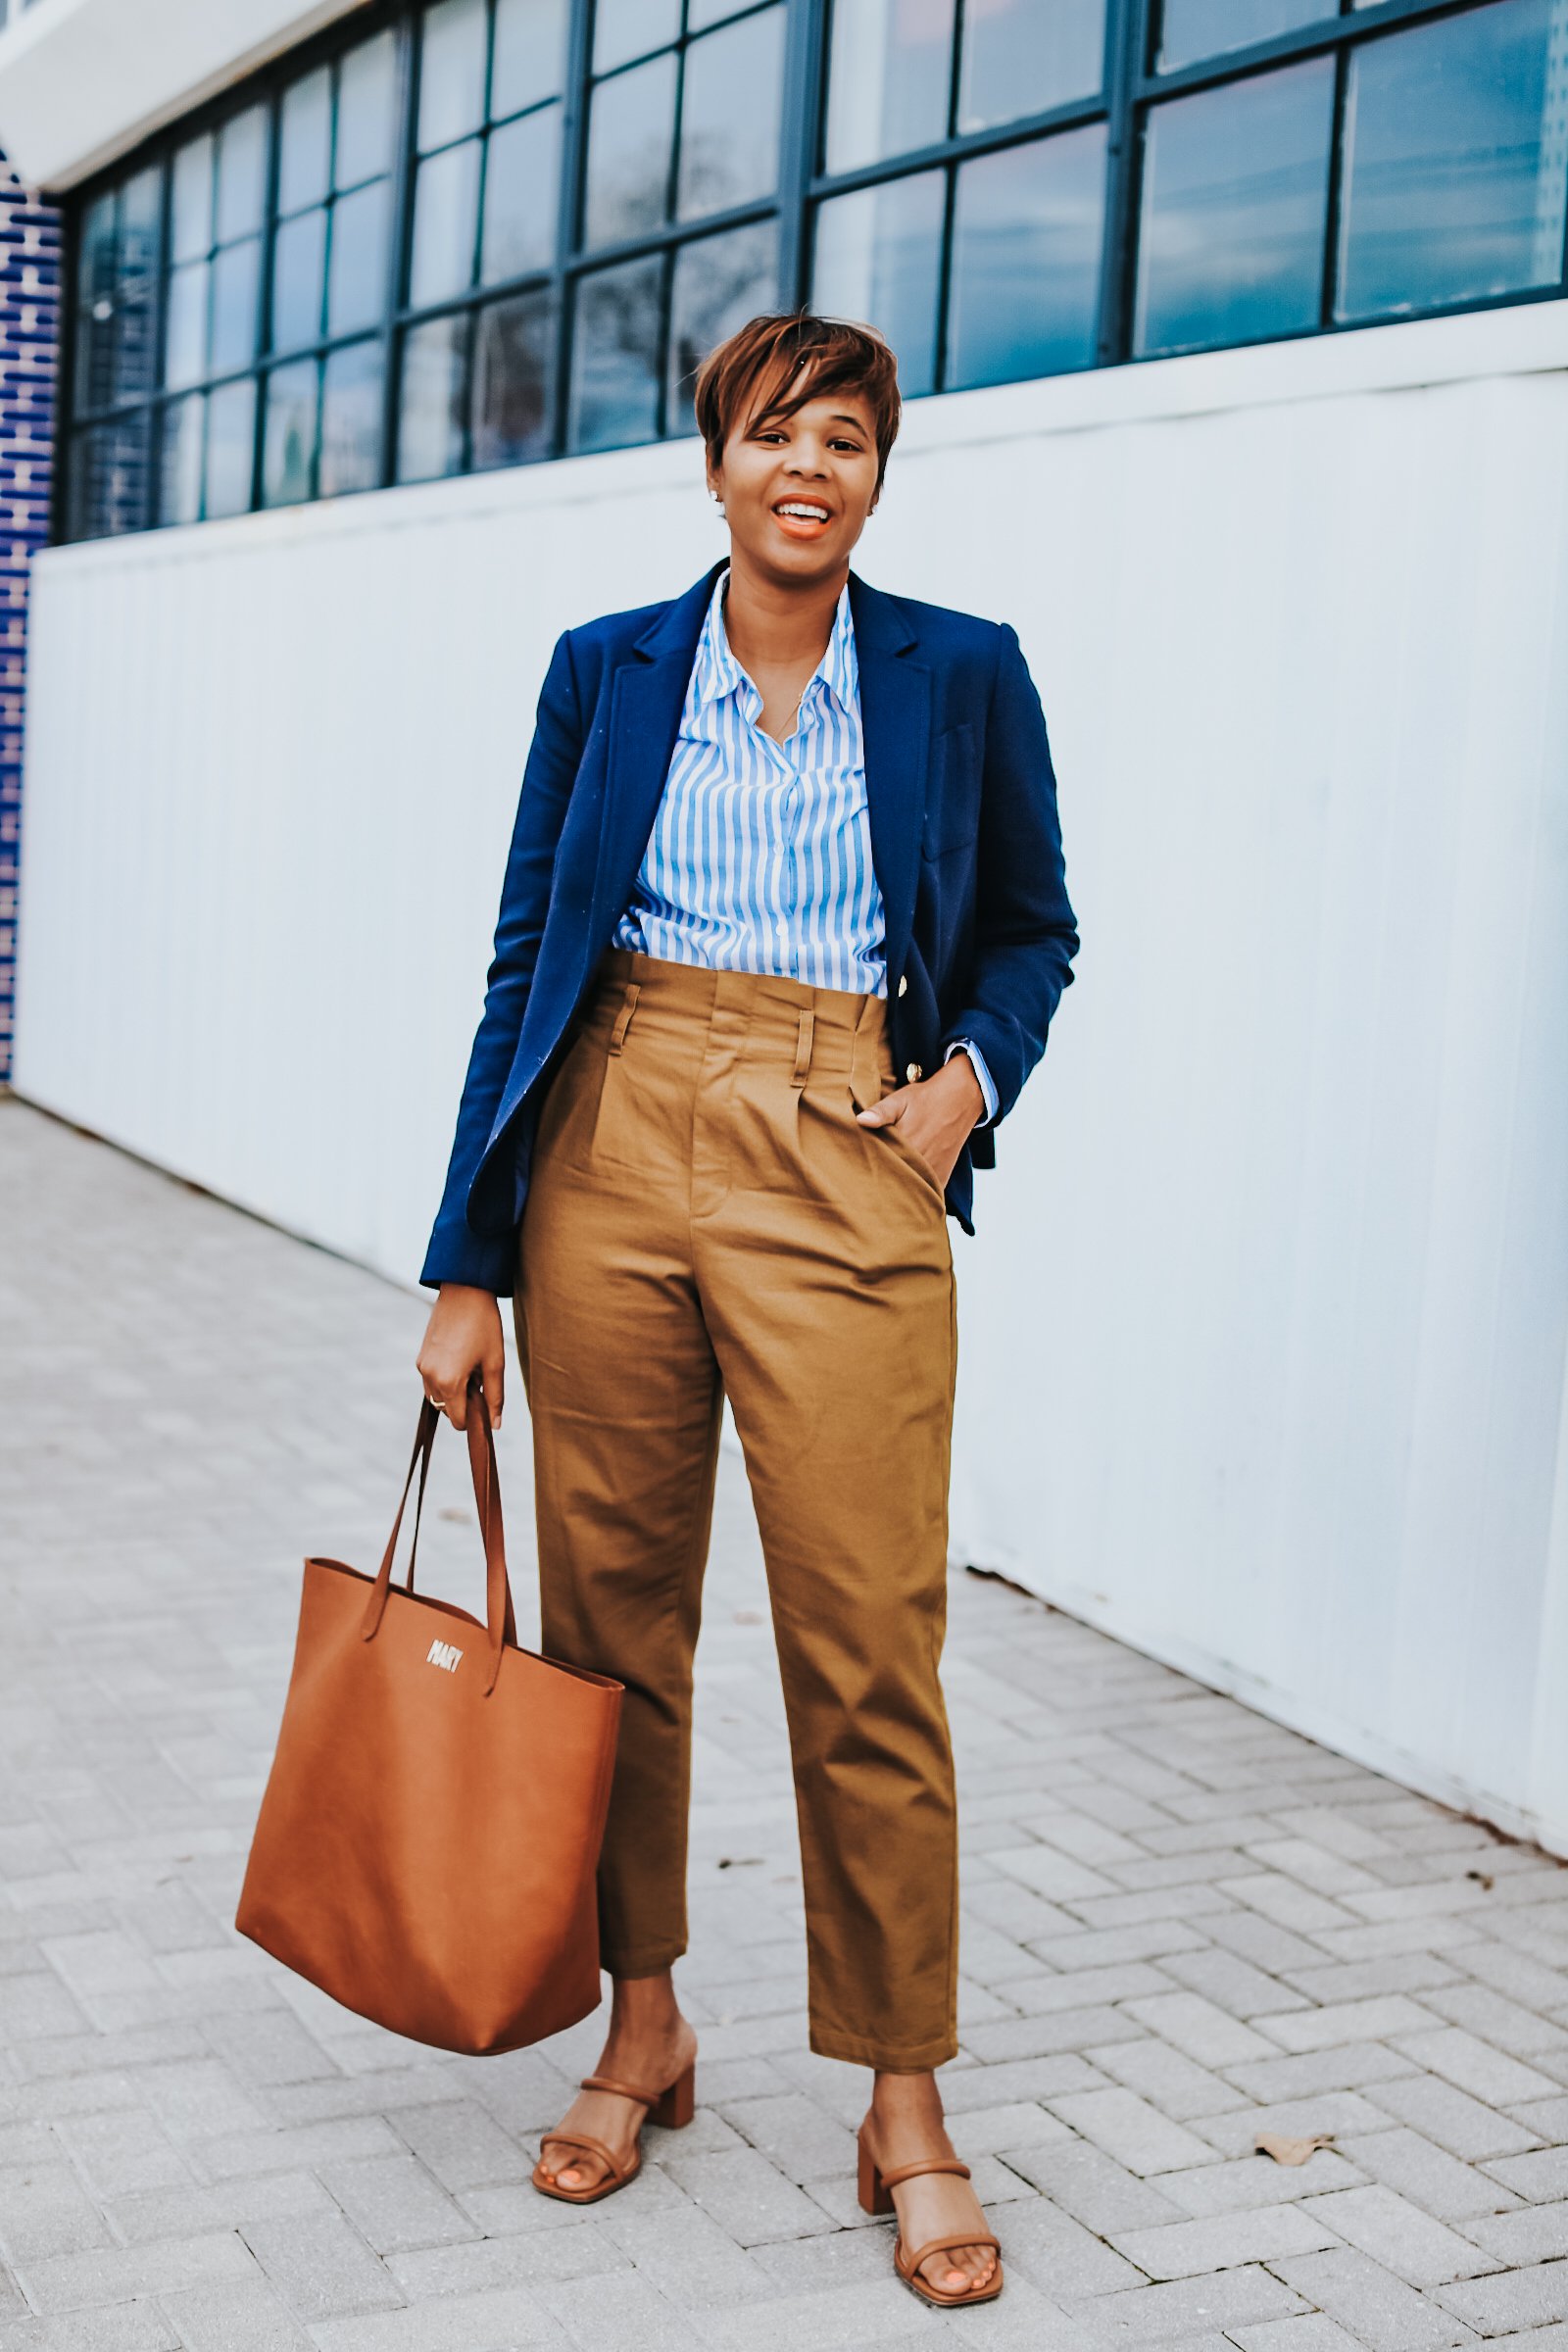 Mary's Little Way in A Navy Blazer, a Blue and White Striped Boyfriend Shirt, Mustard Yellow Paperboy Pants, and Brown Block Heels